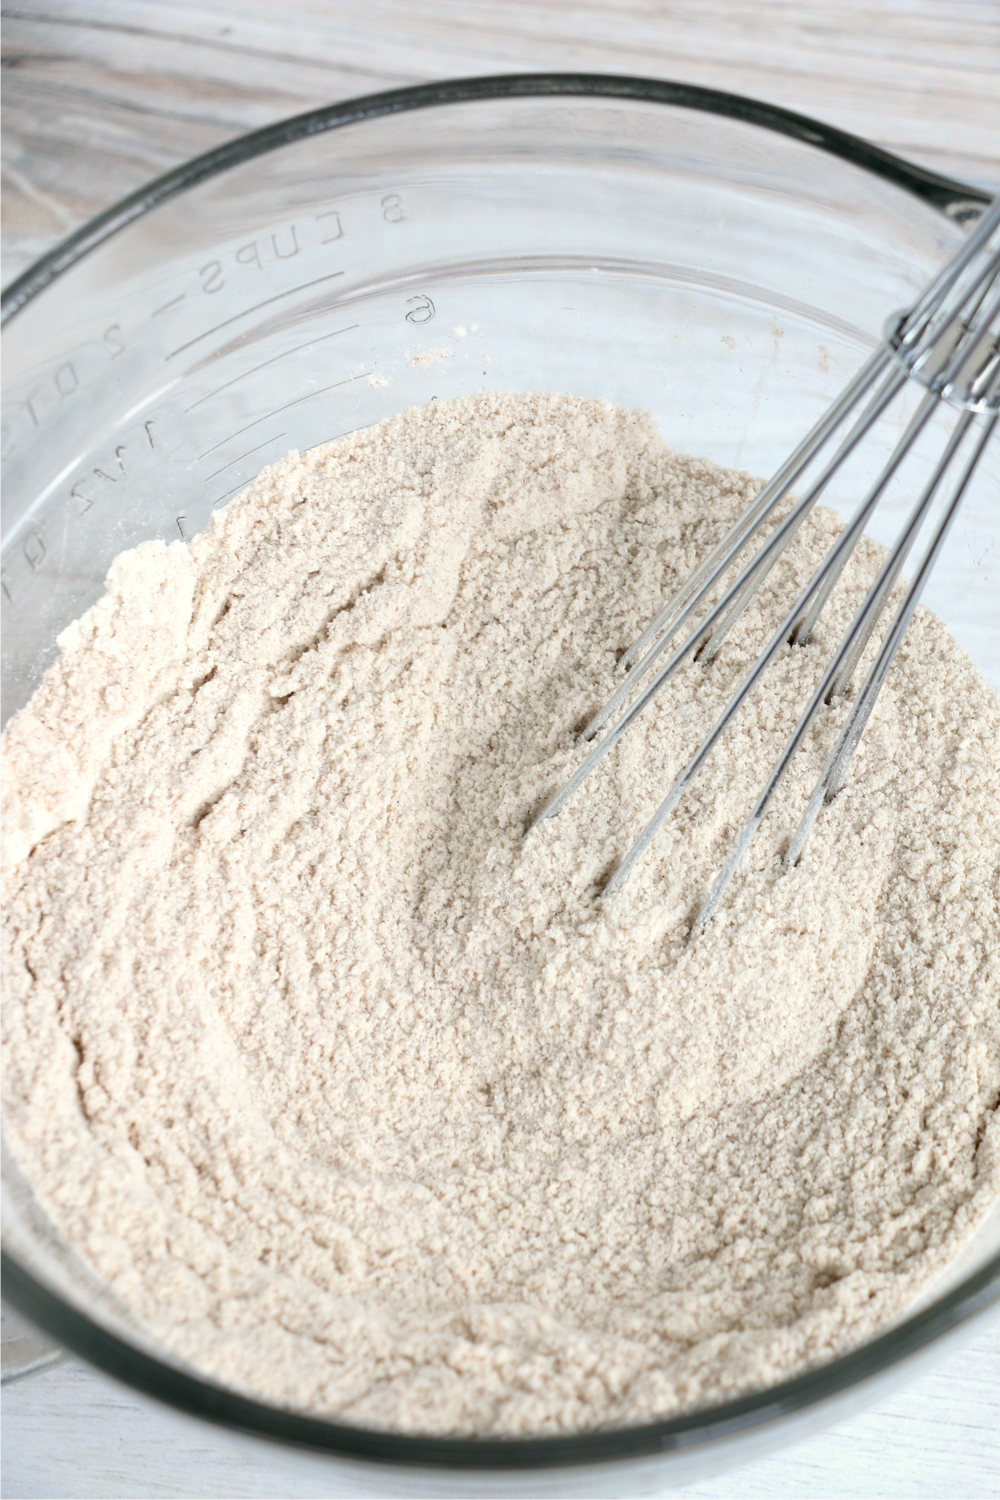 Whisking together flour, sugar, cinnamon and salt in a glass bowl